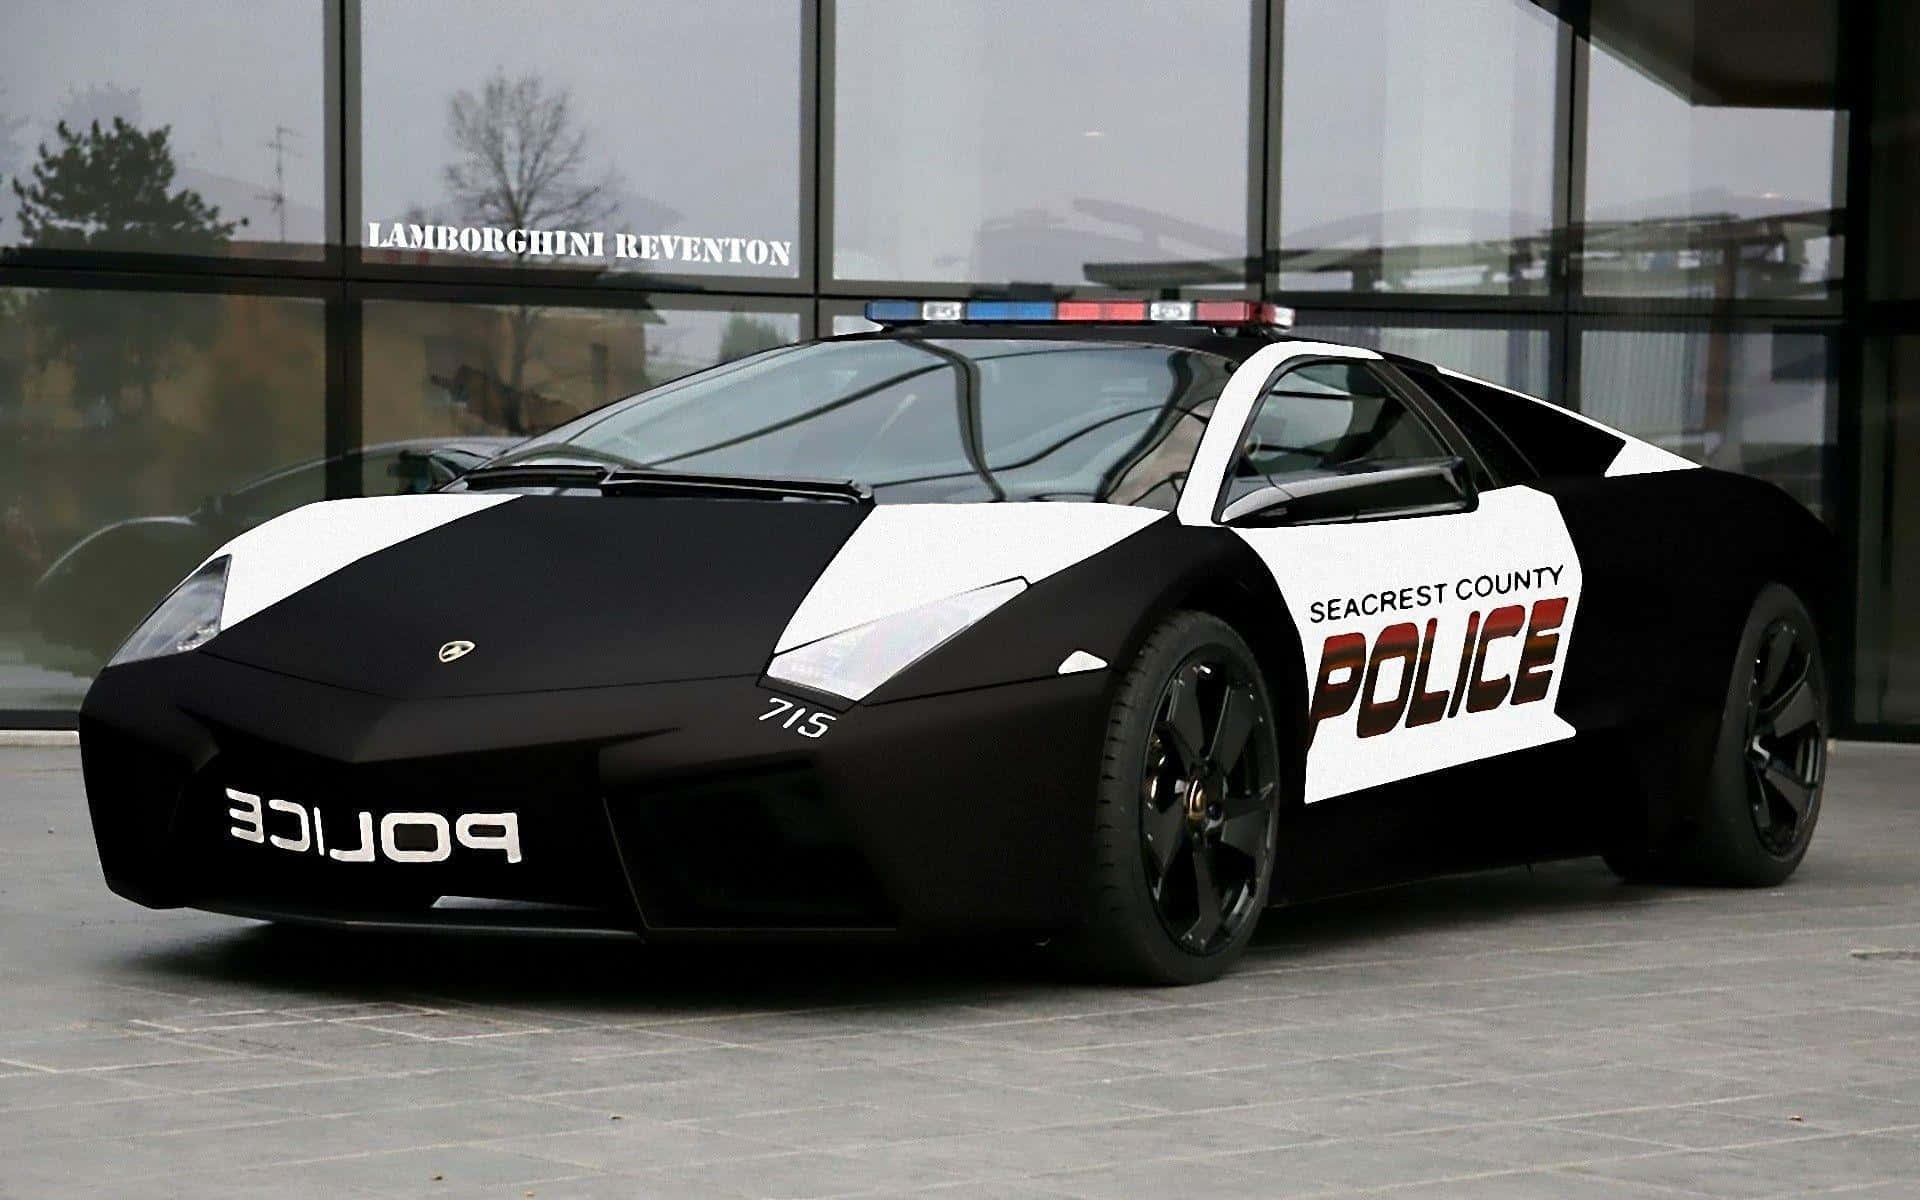 A Police Car Is Parked In Front Of A Building